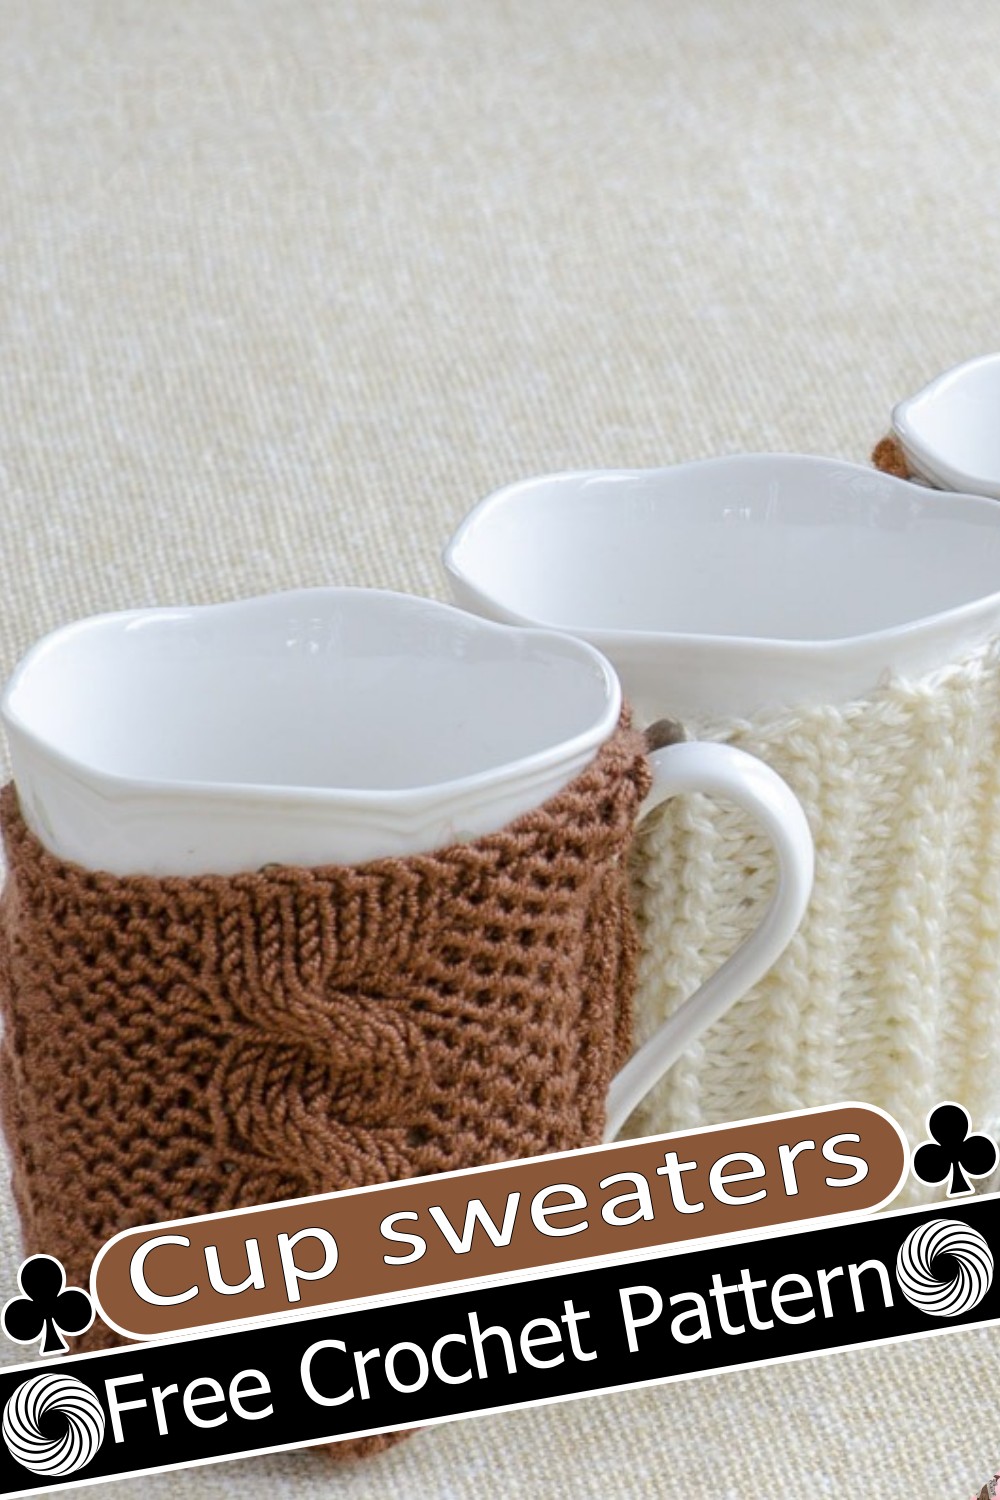 Cup sweaters